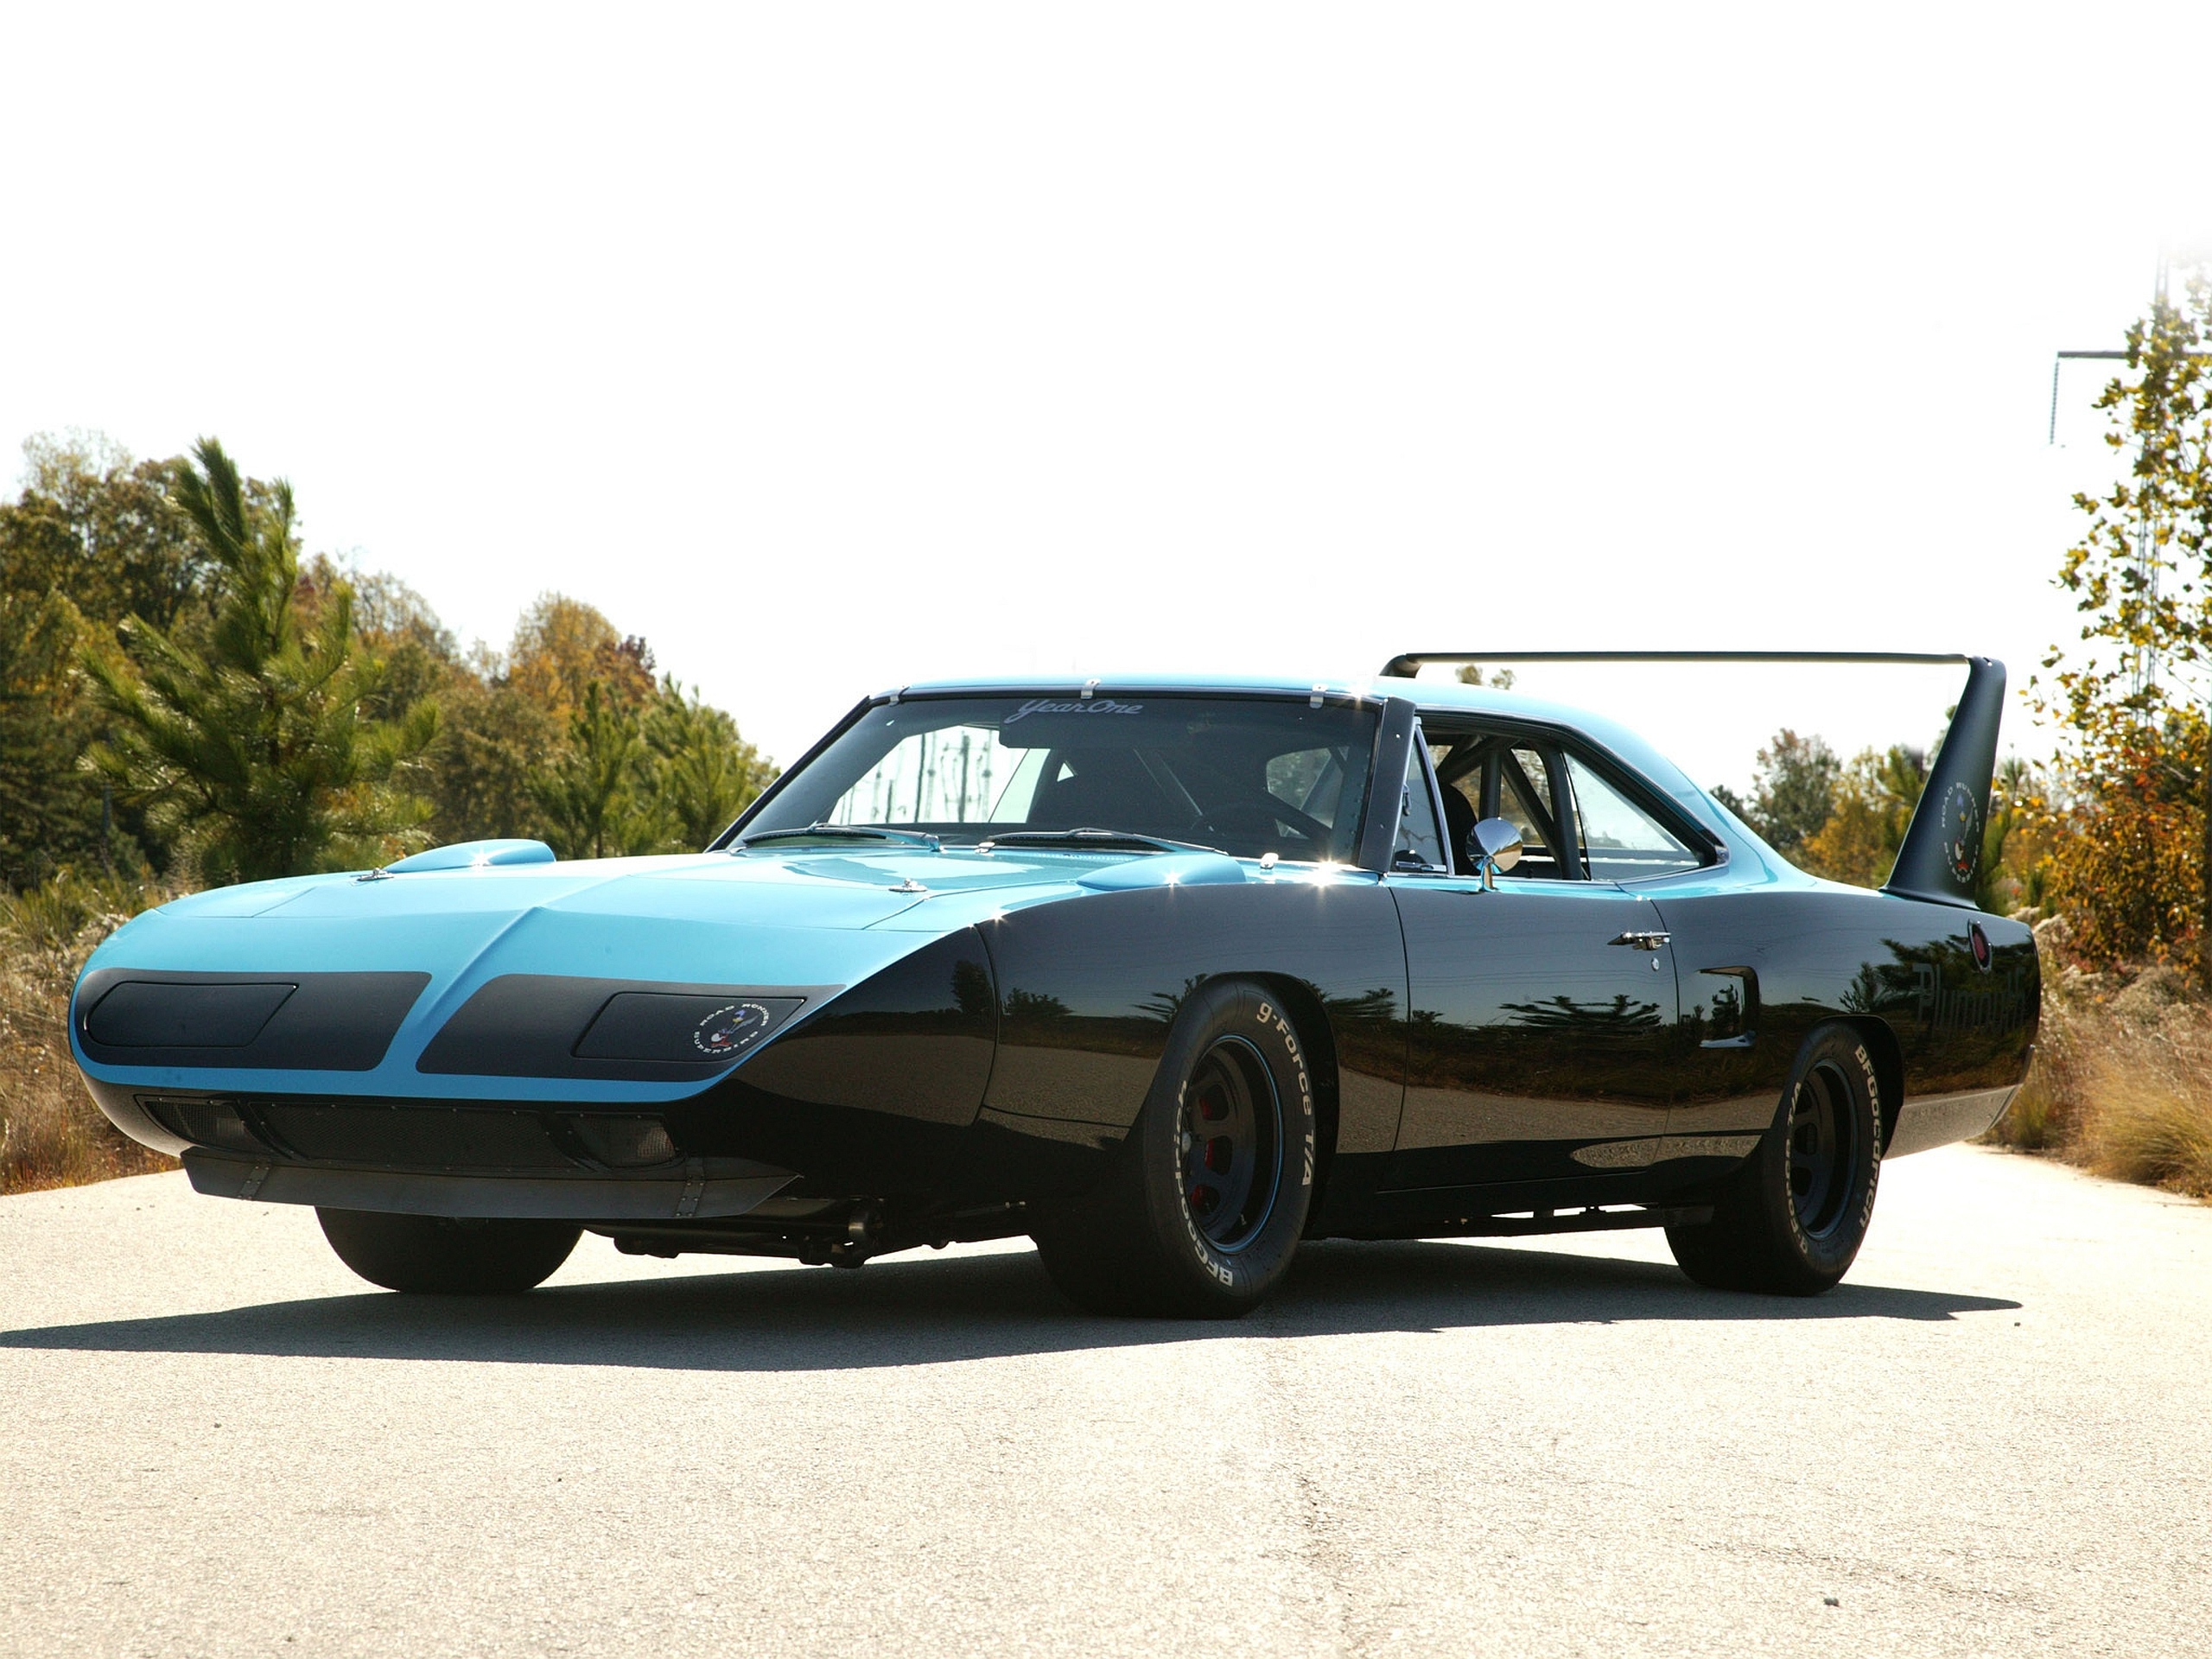 Vehicles 1970 Plymouth Superbird HD Wallpaper | Background Image